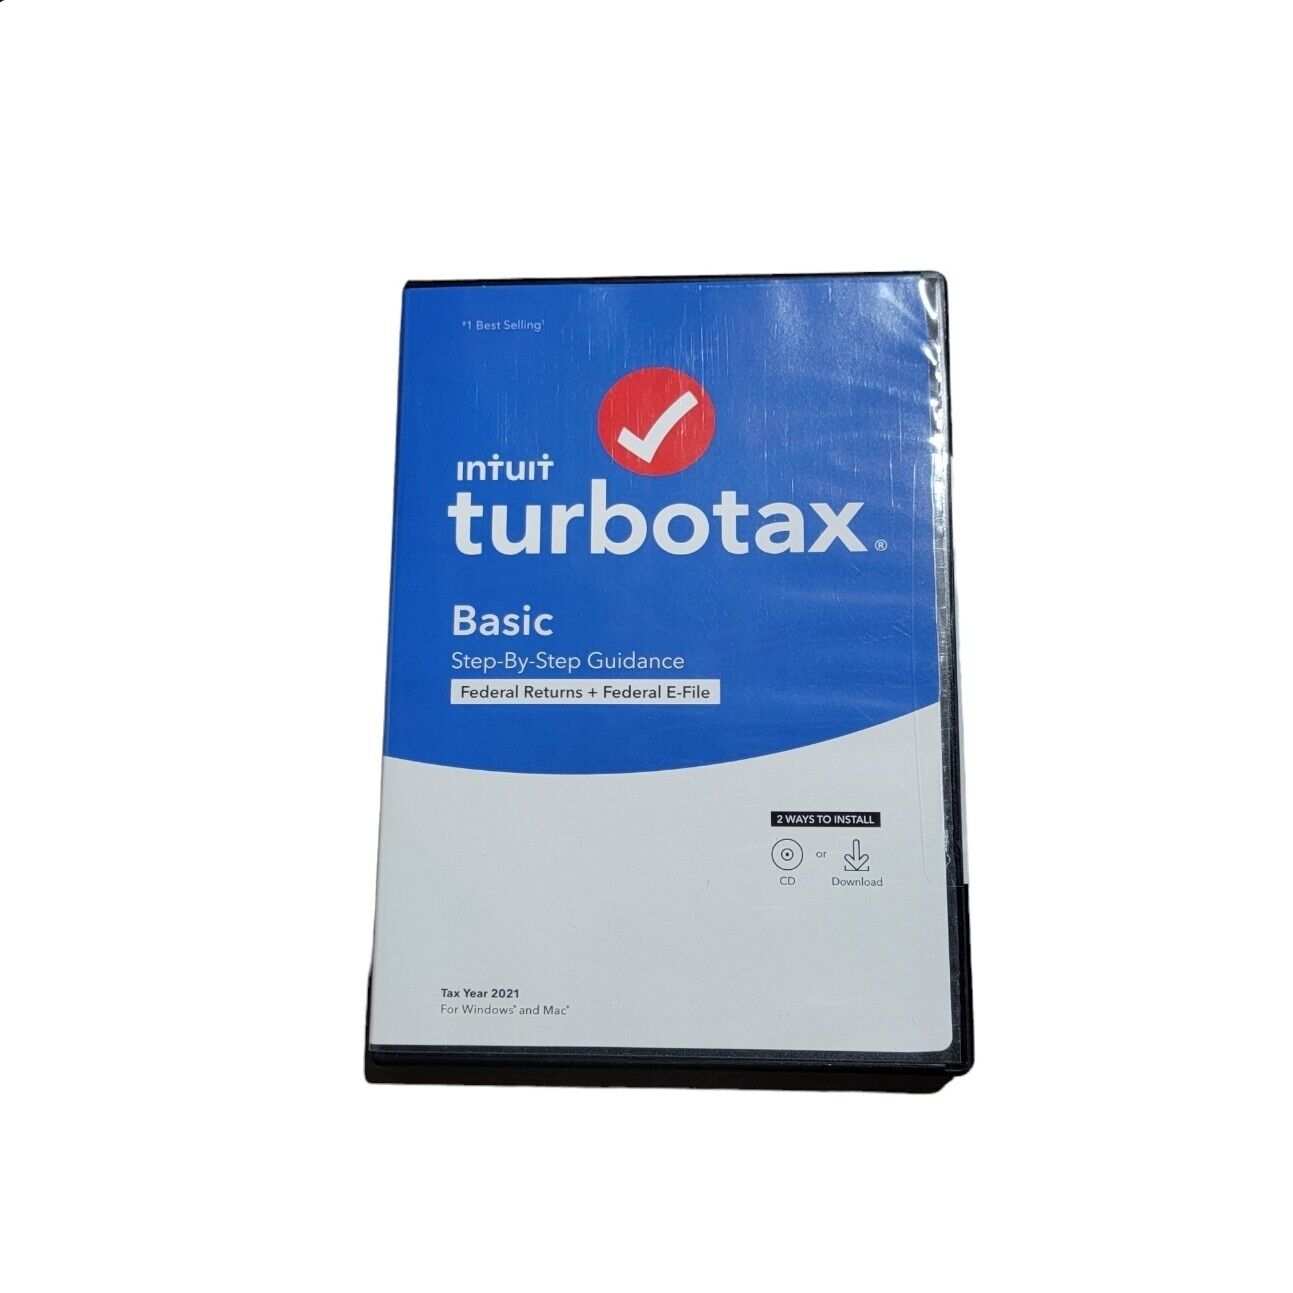 Intuit TurboTax Basic Federal Returns + E-File- CD or Download- 2021 TAXES NEW 